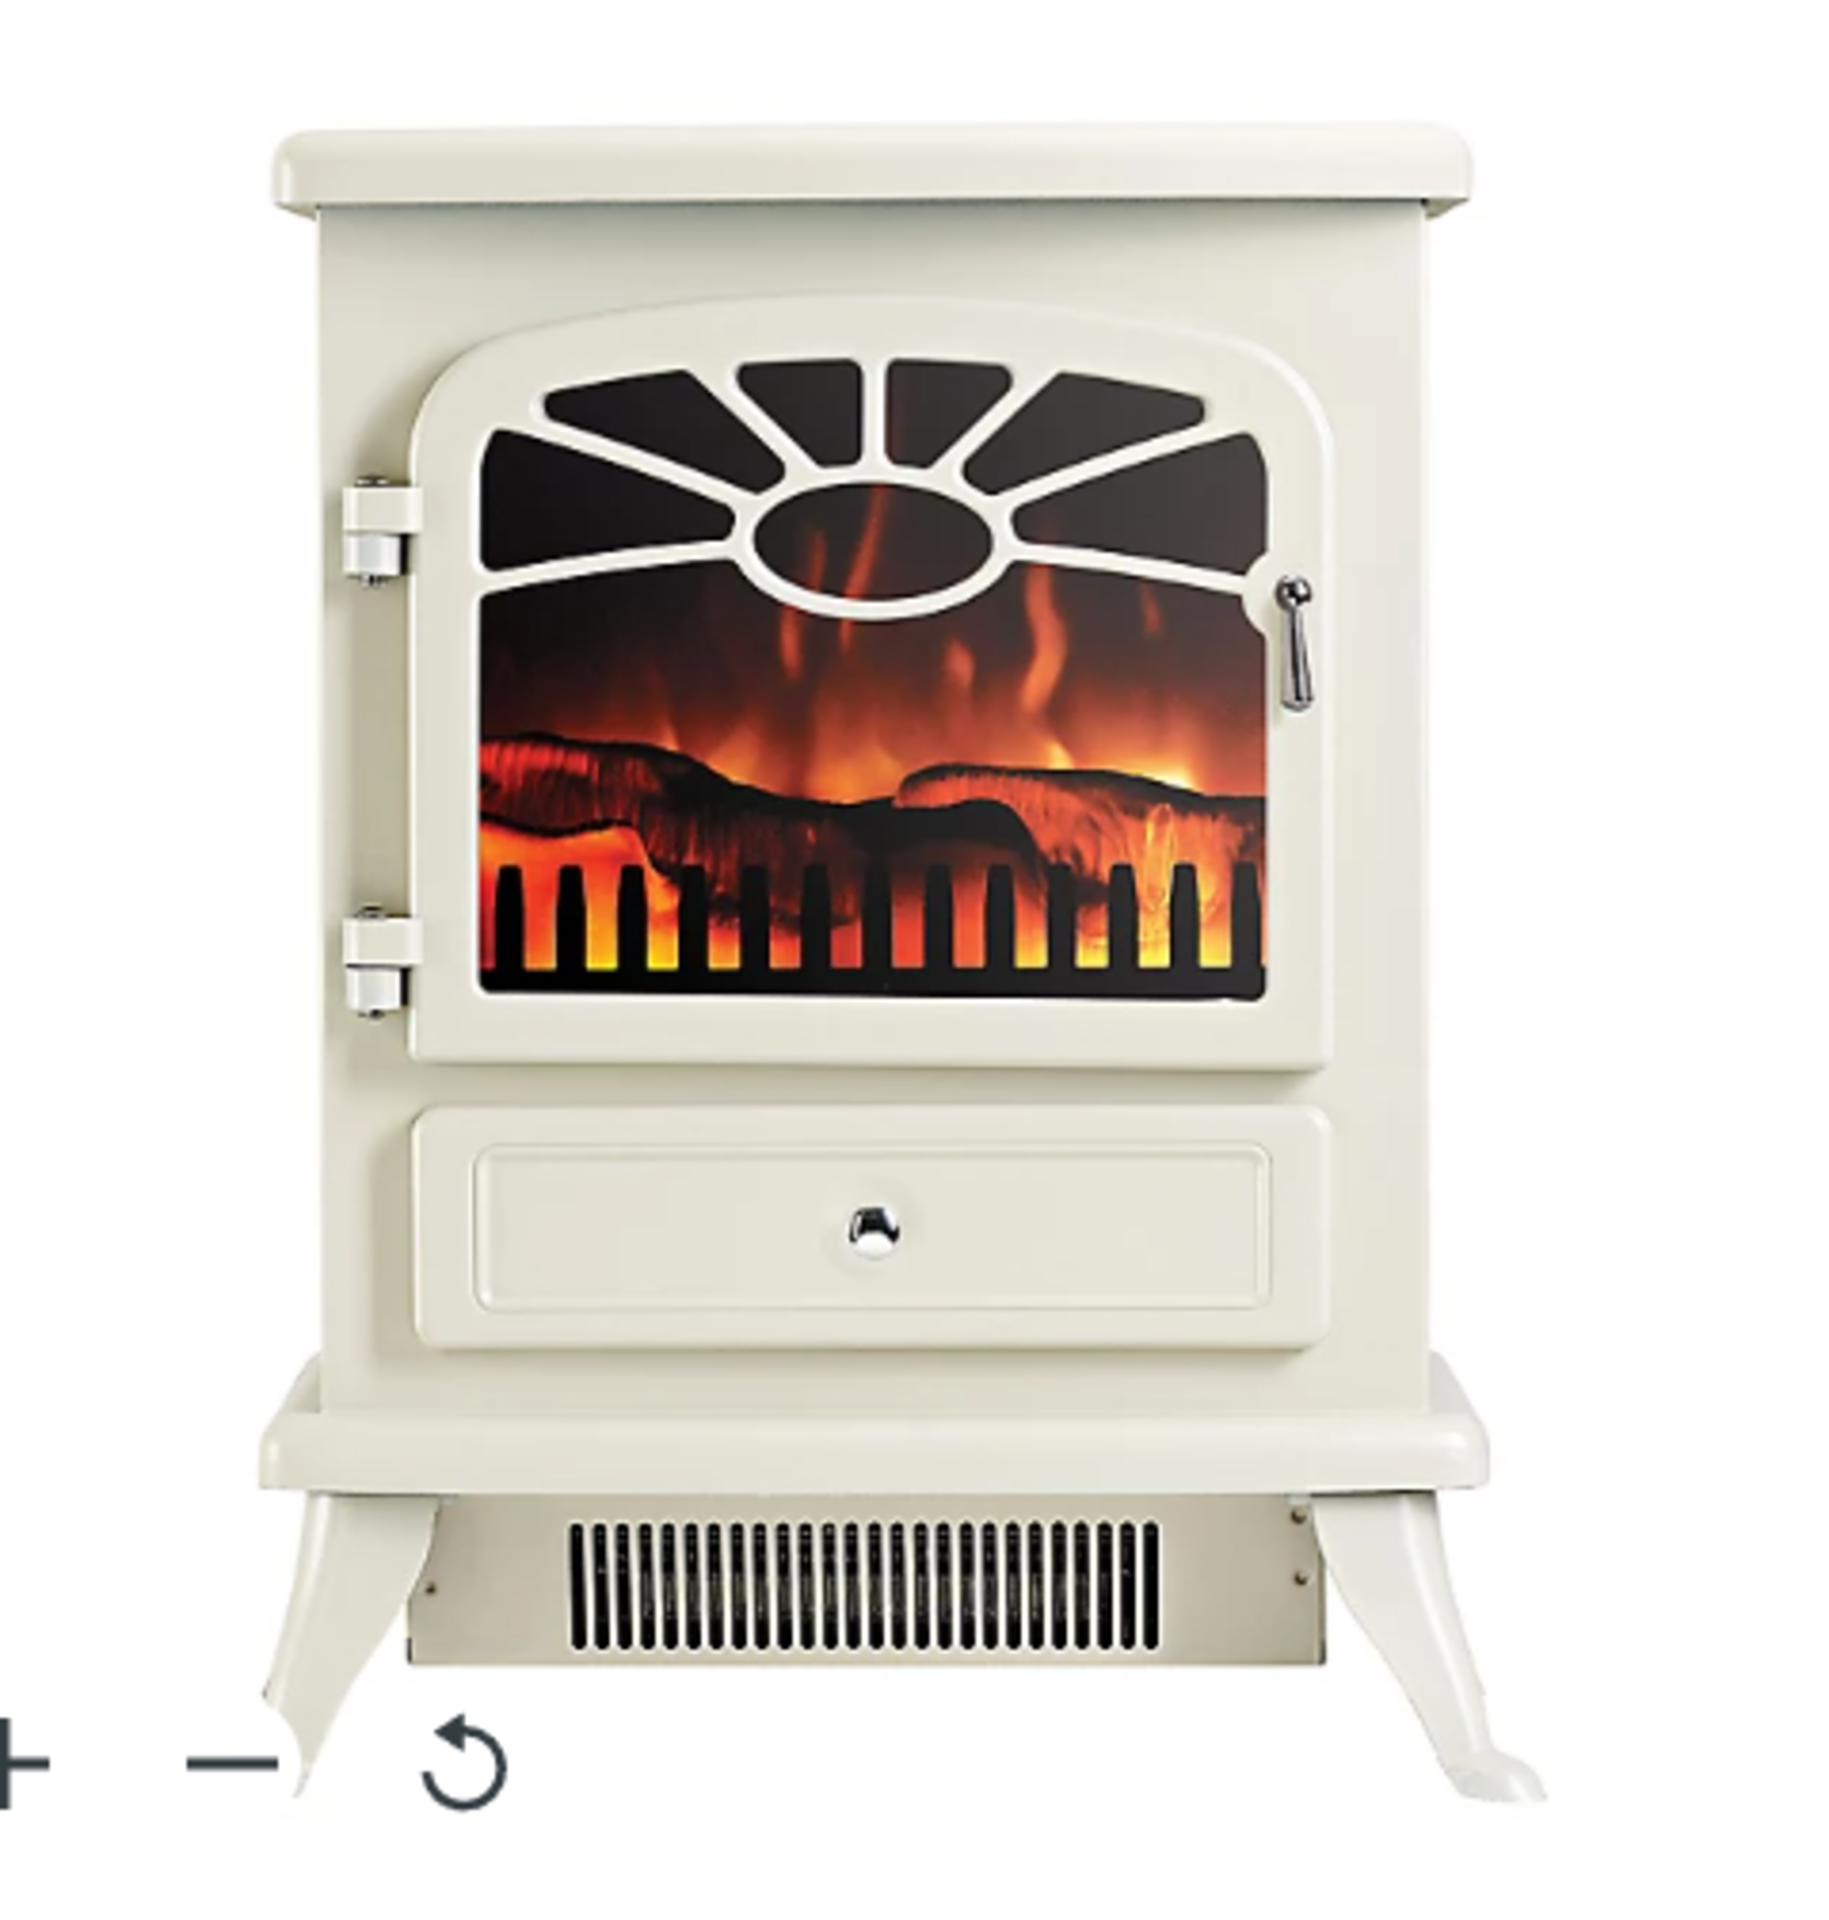 Focal Point ES 2000 1.8kW Matt Cream Electric Stove. - ER44. This electric fire features a which